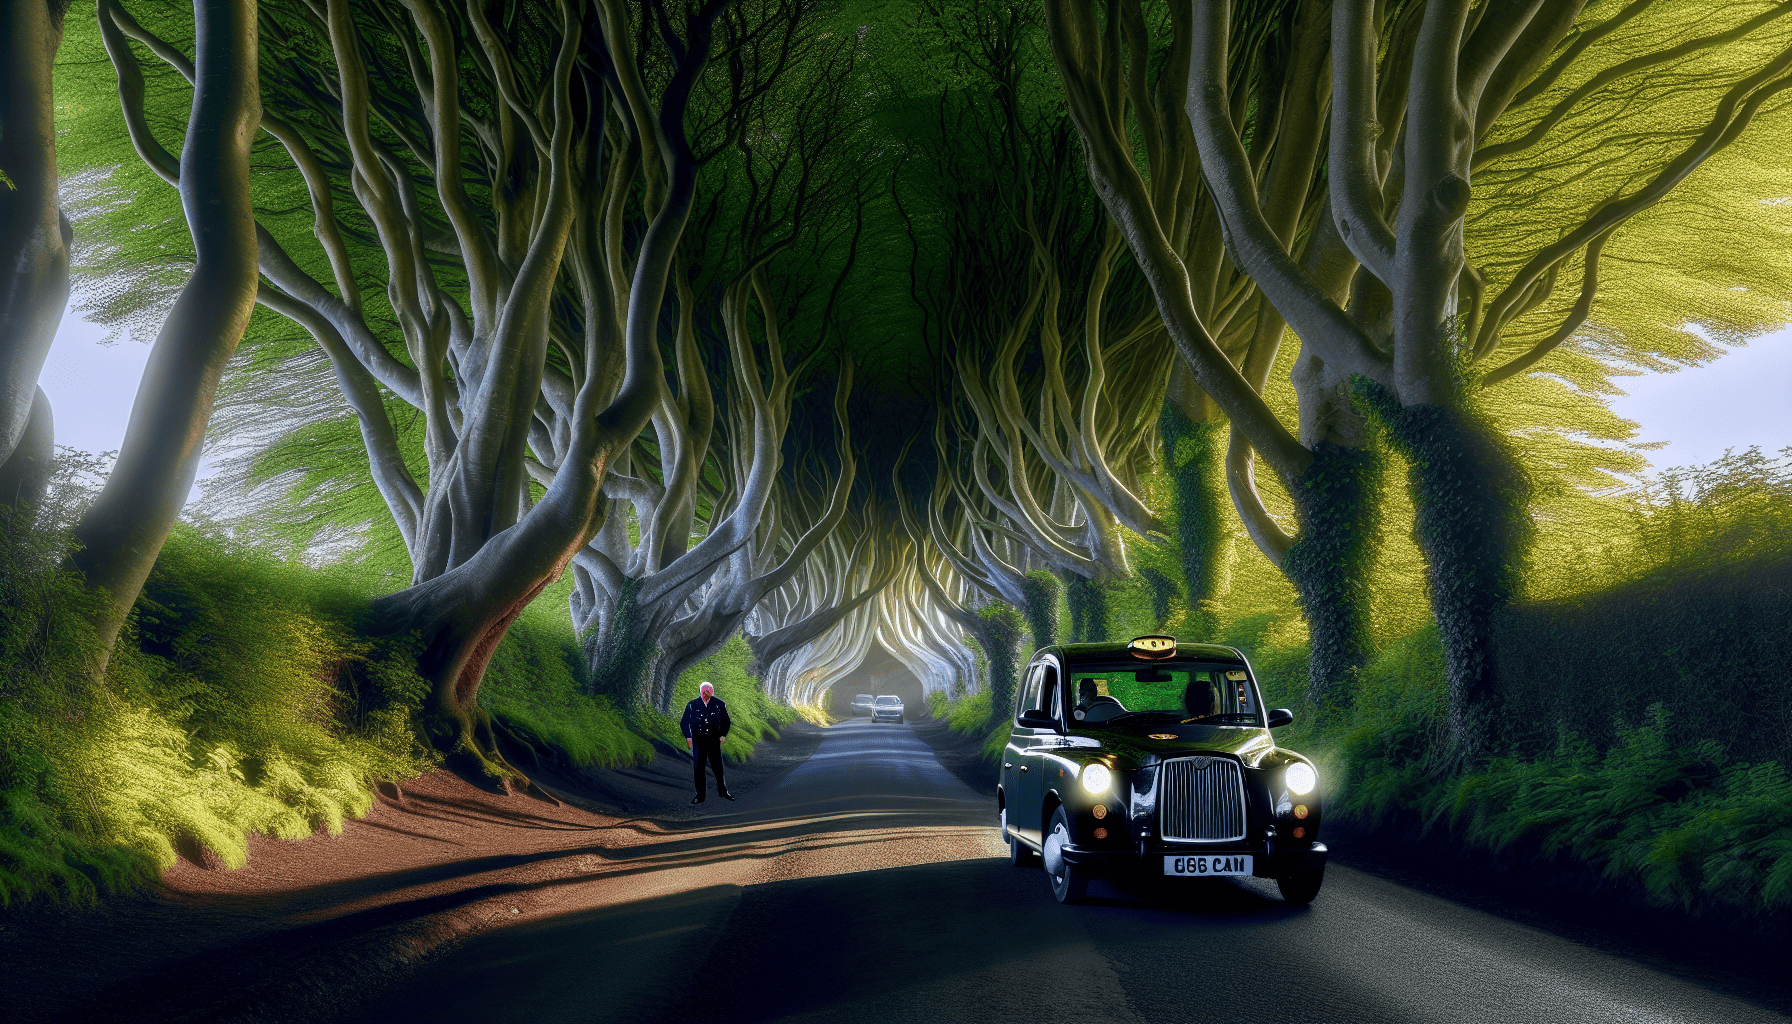 The Dark Hedges, a famous Game of Thrones filming location in Northern Ireland